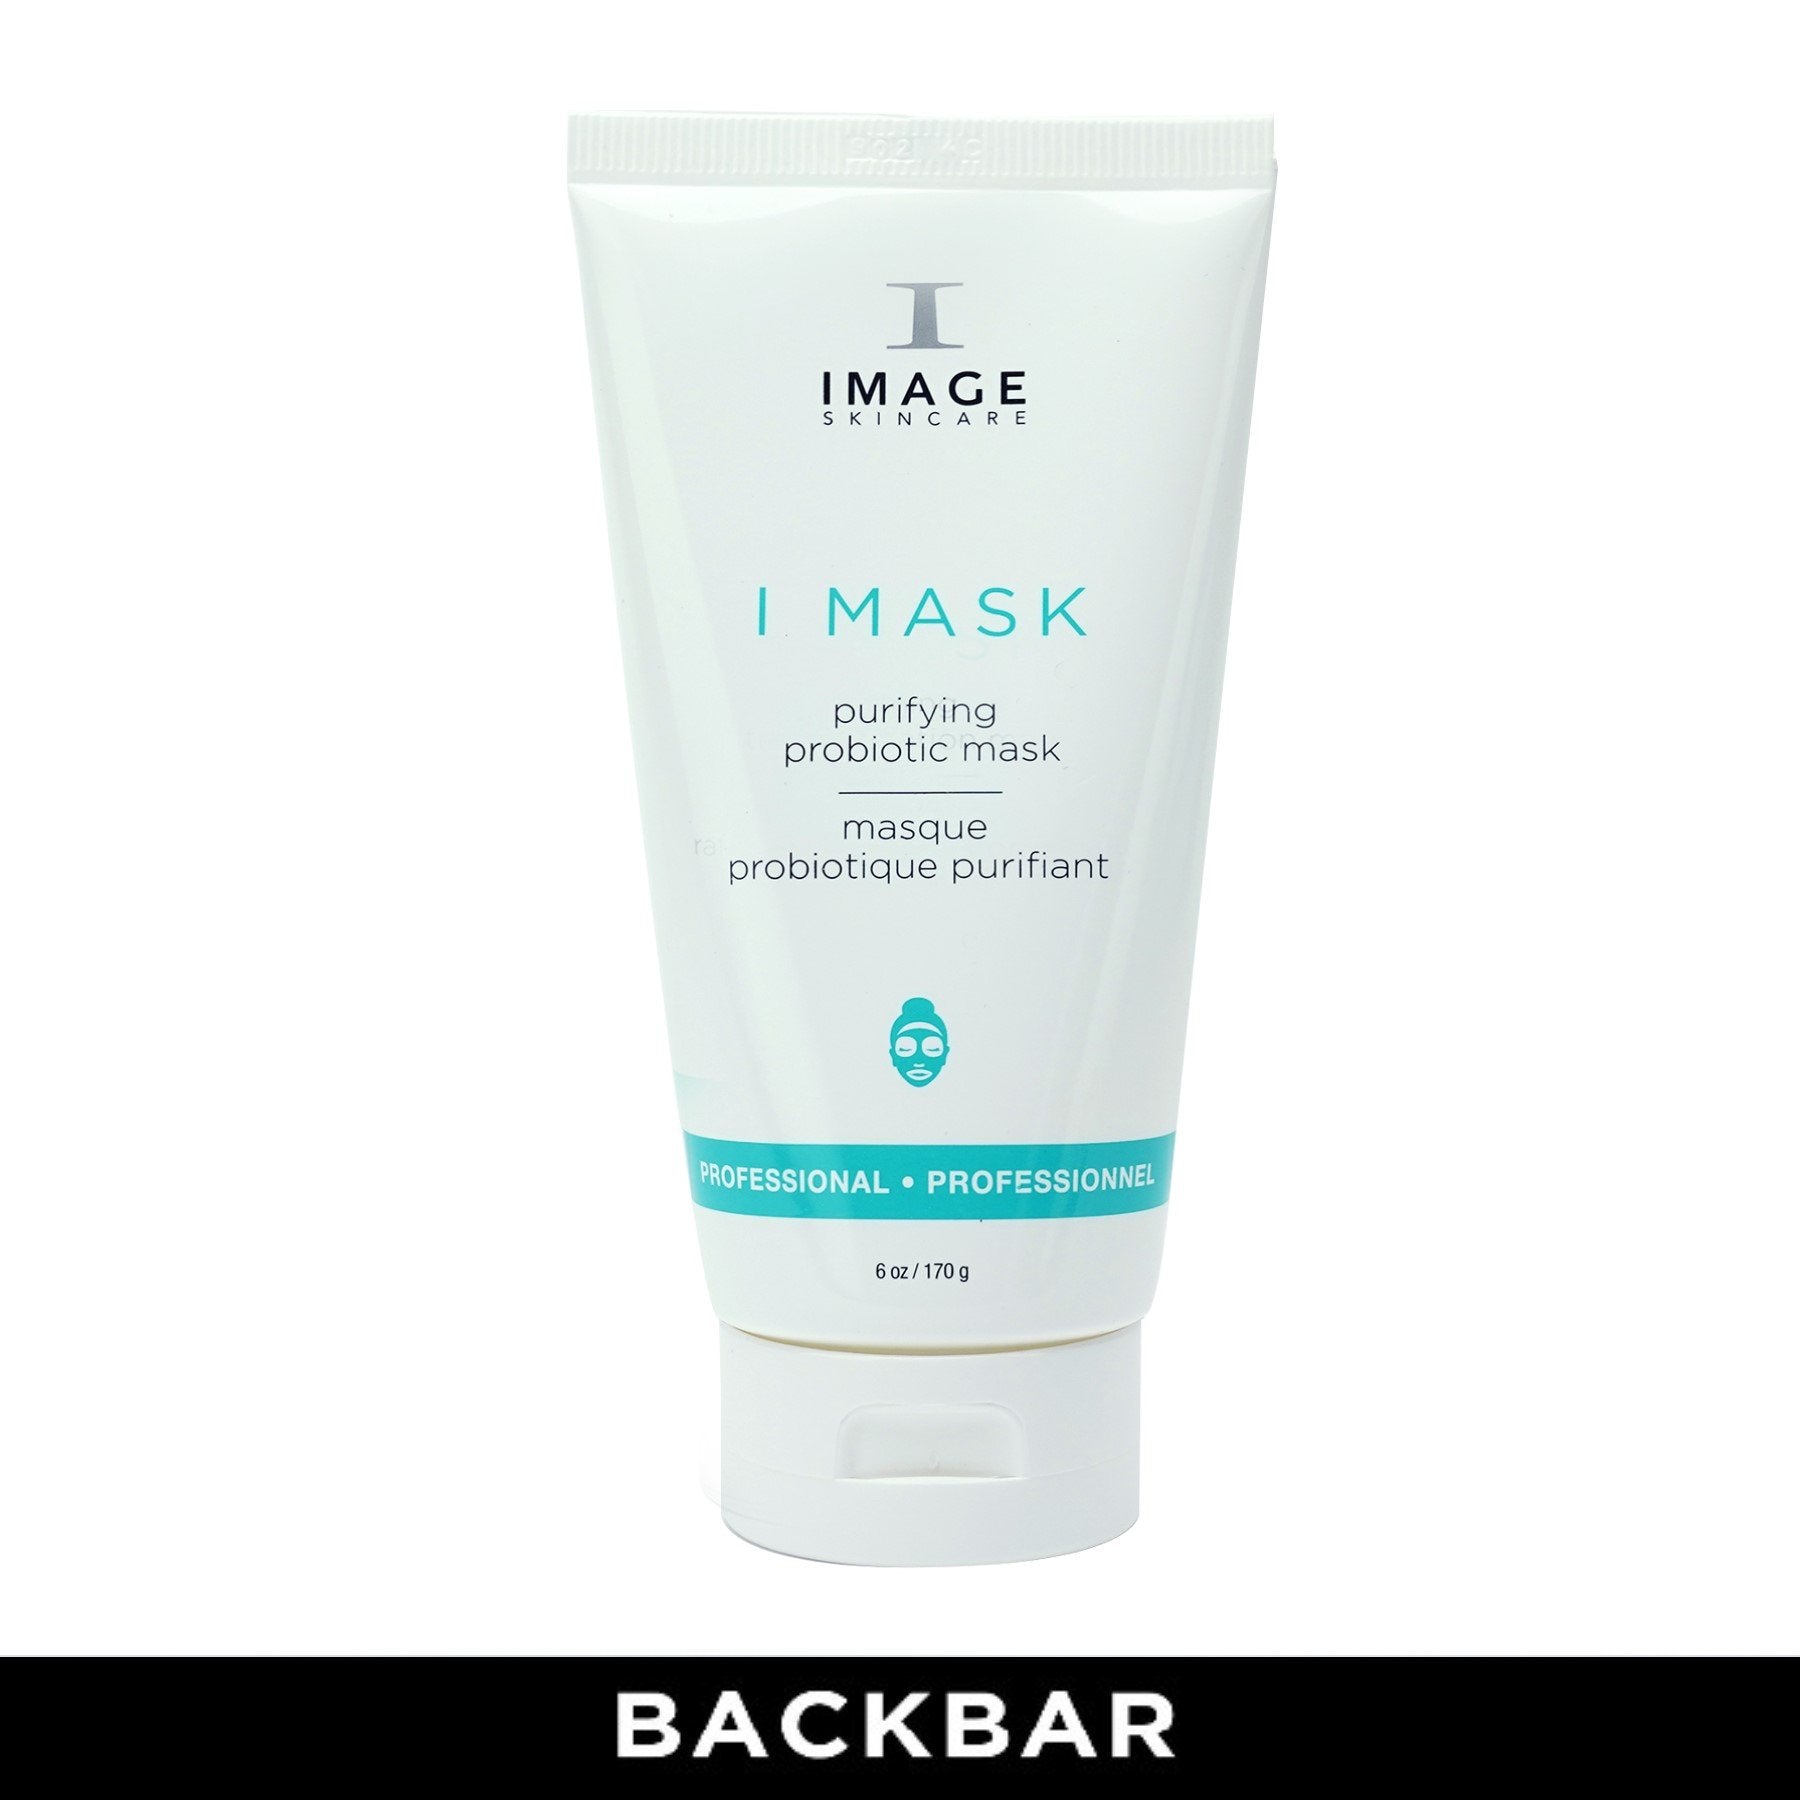 PROFESSIONAL - I MASK purifying probiotic clay mask - 170g - BB-149N